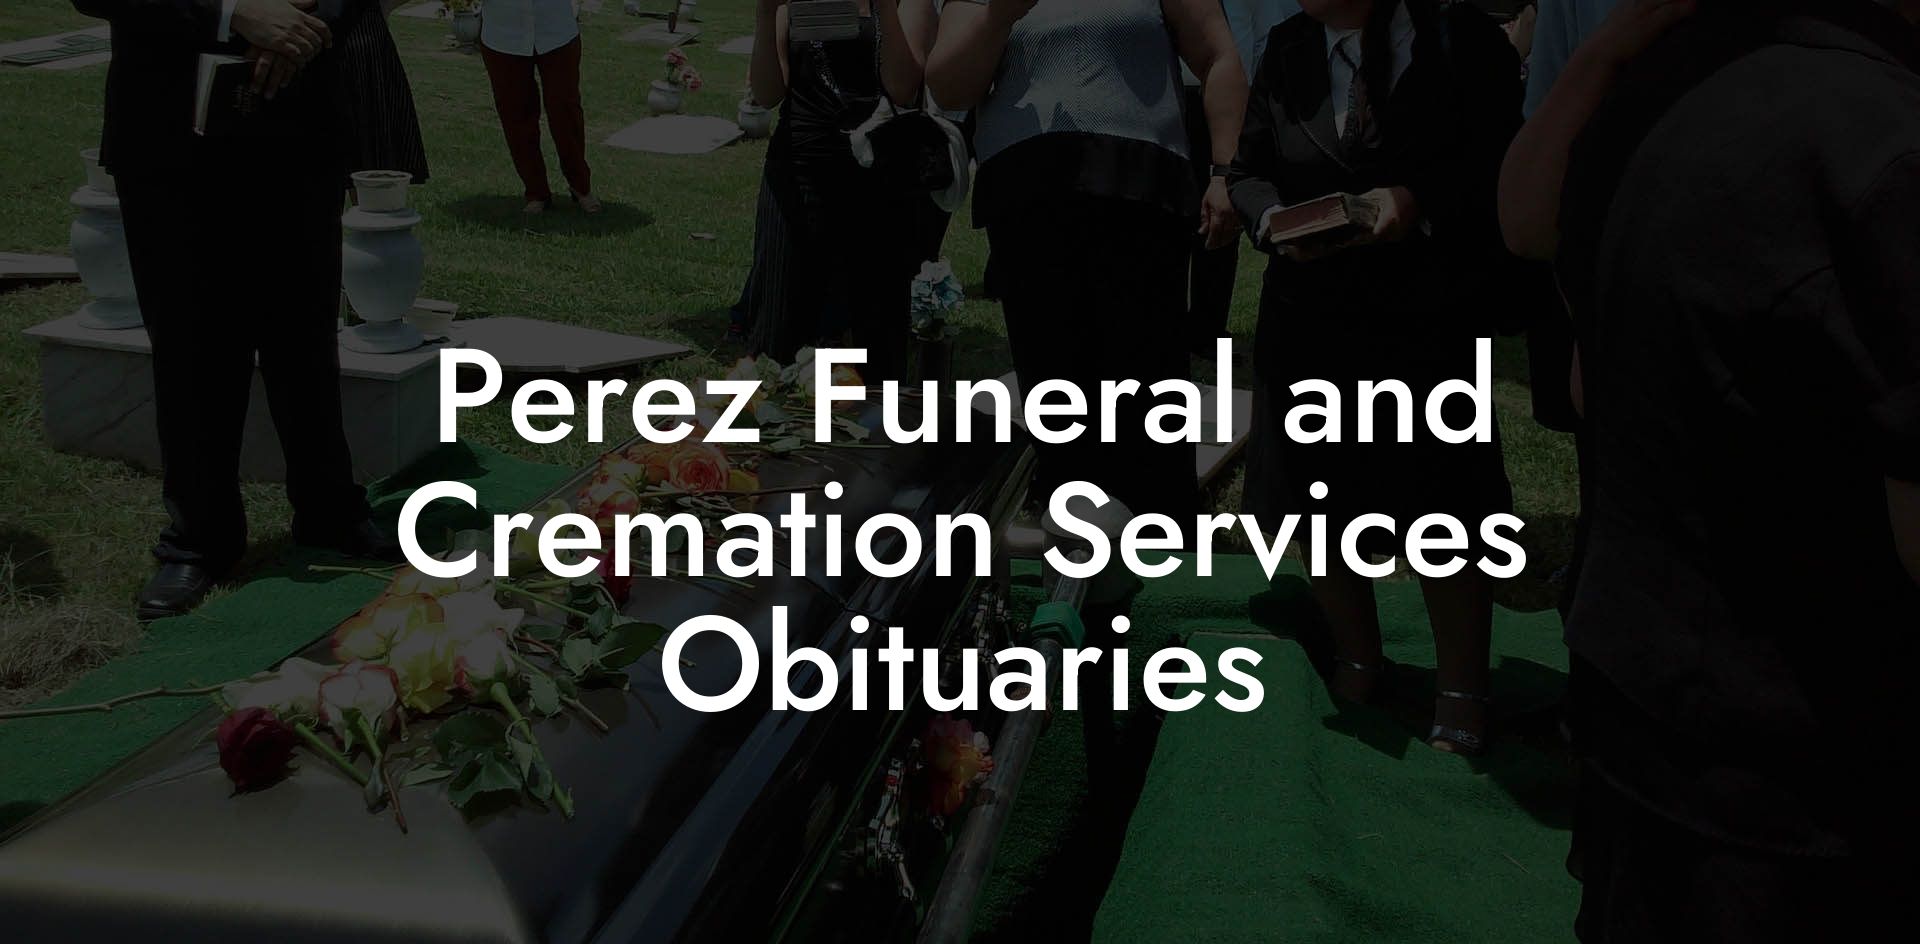 Perez Funeral and Cremation Services Obituaries